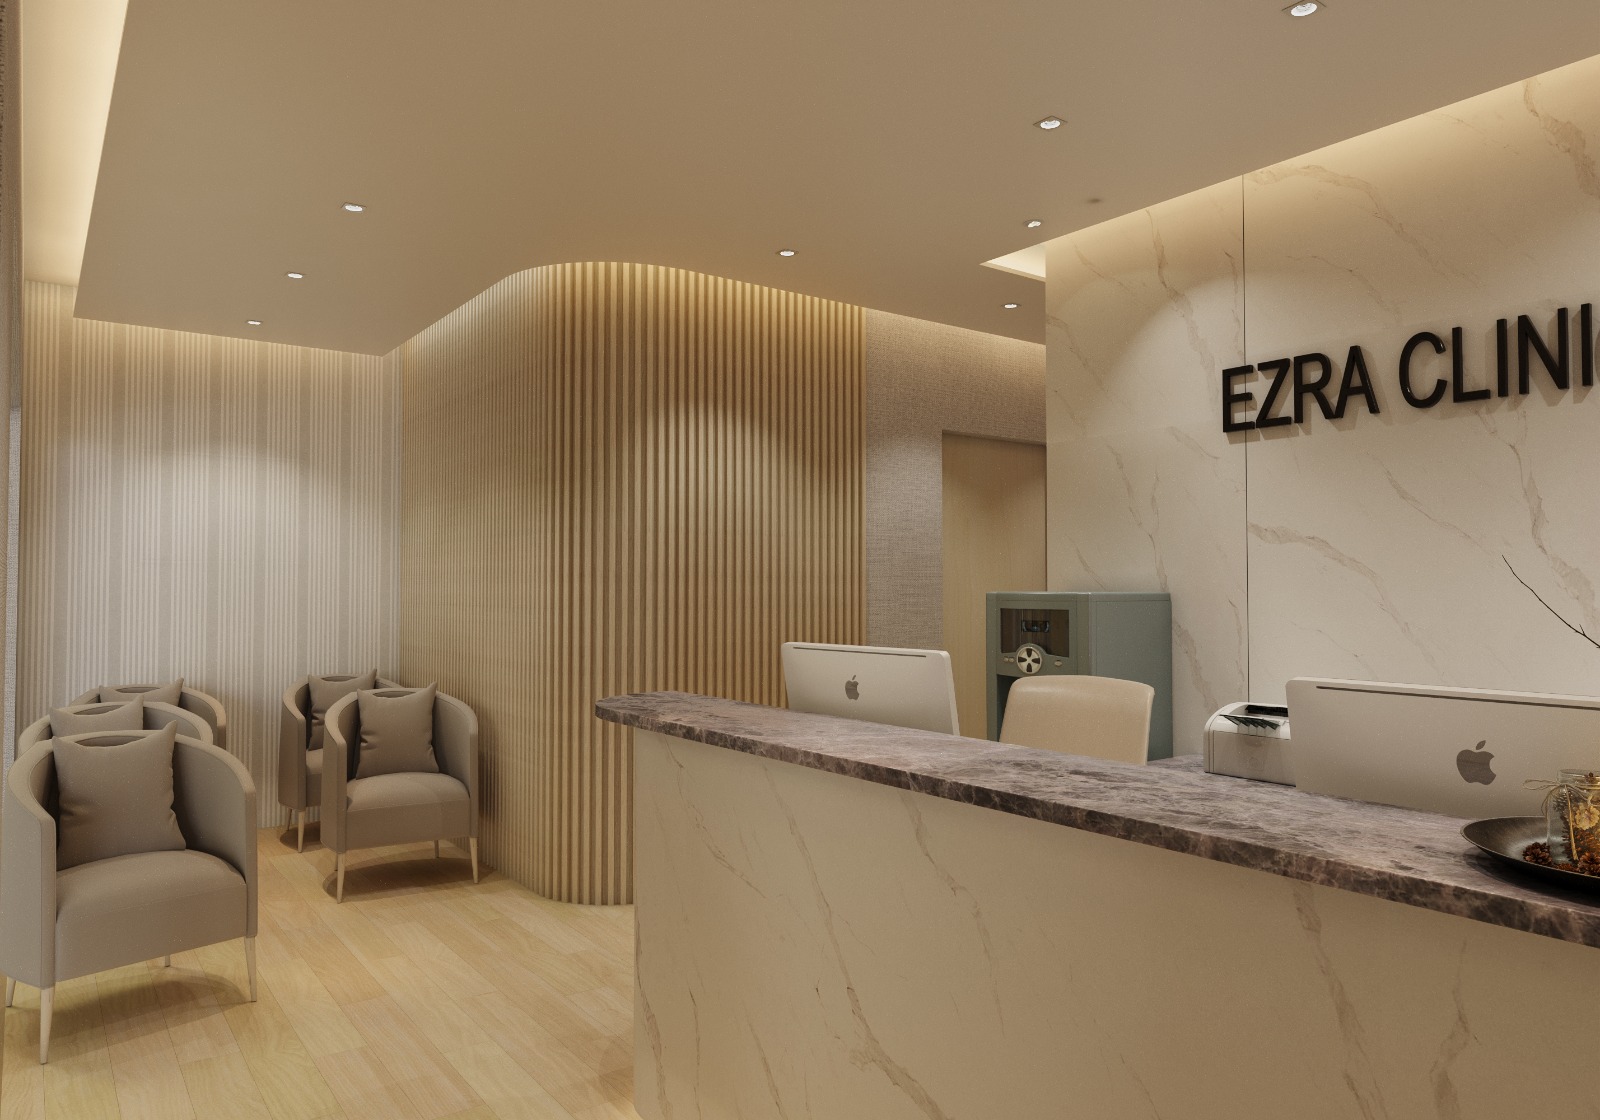 ABOUT EZRA CLINIC